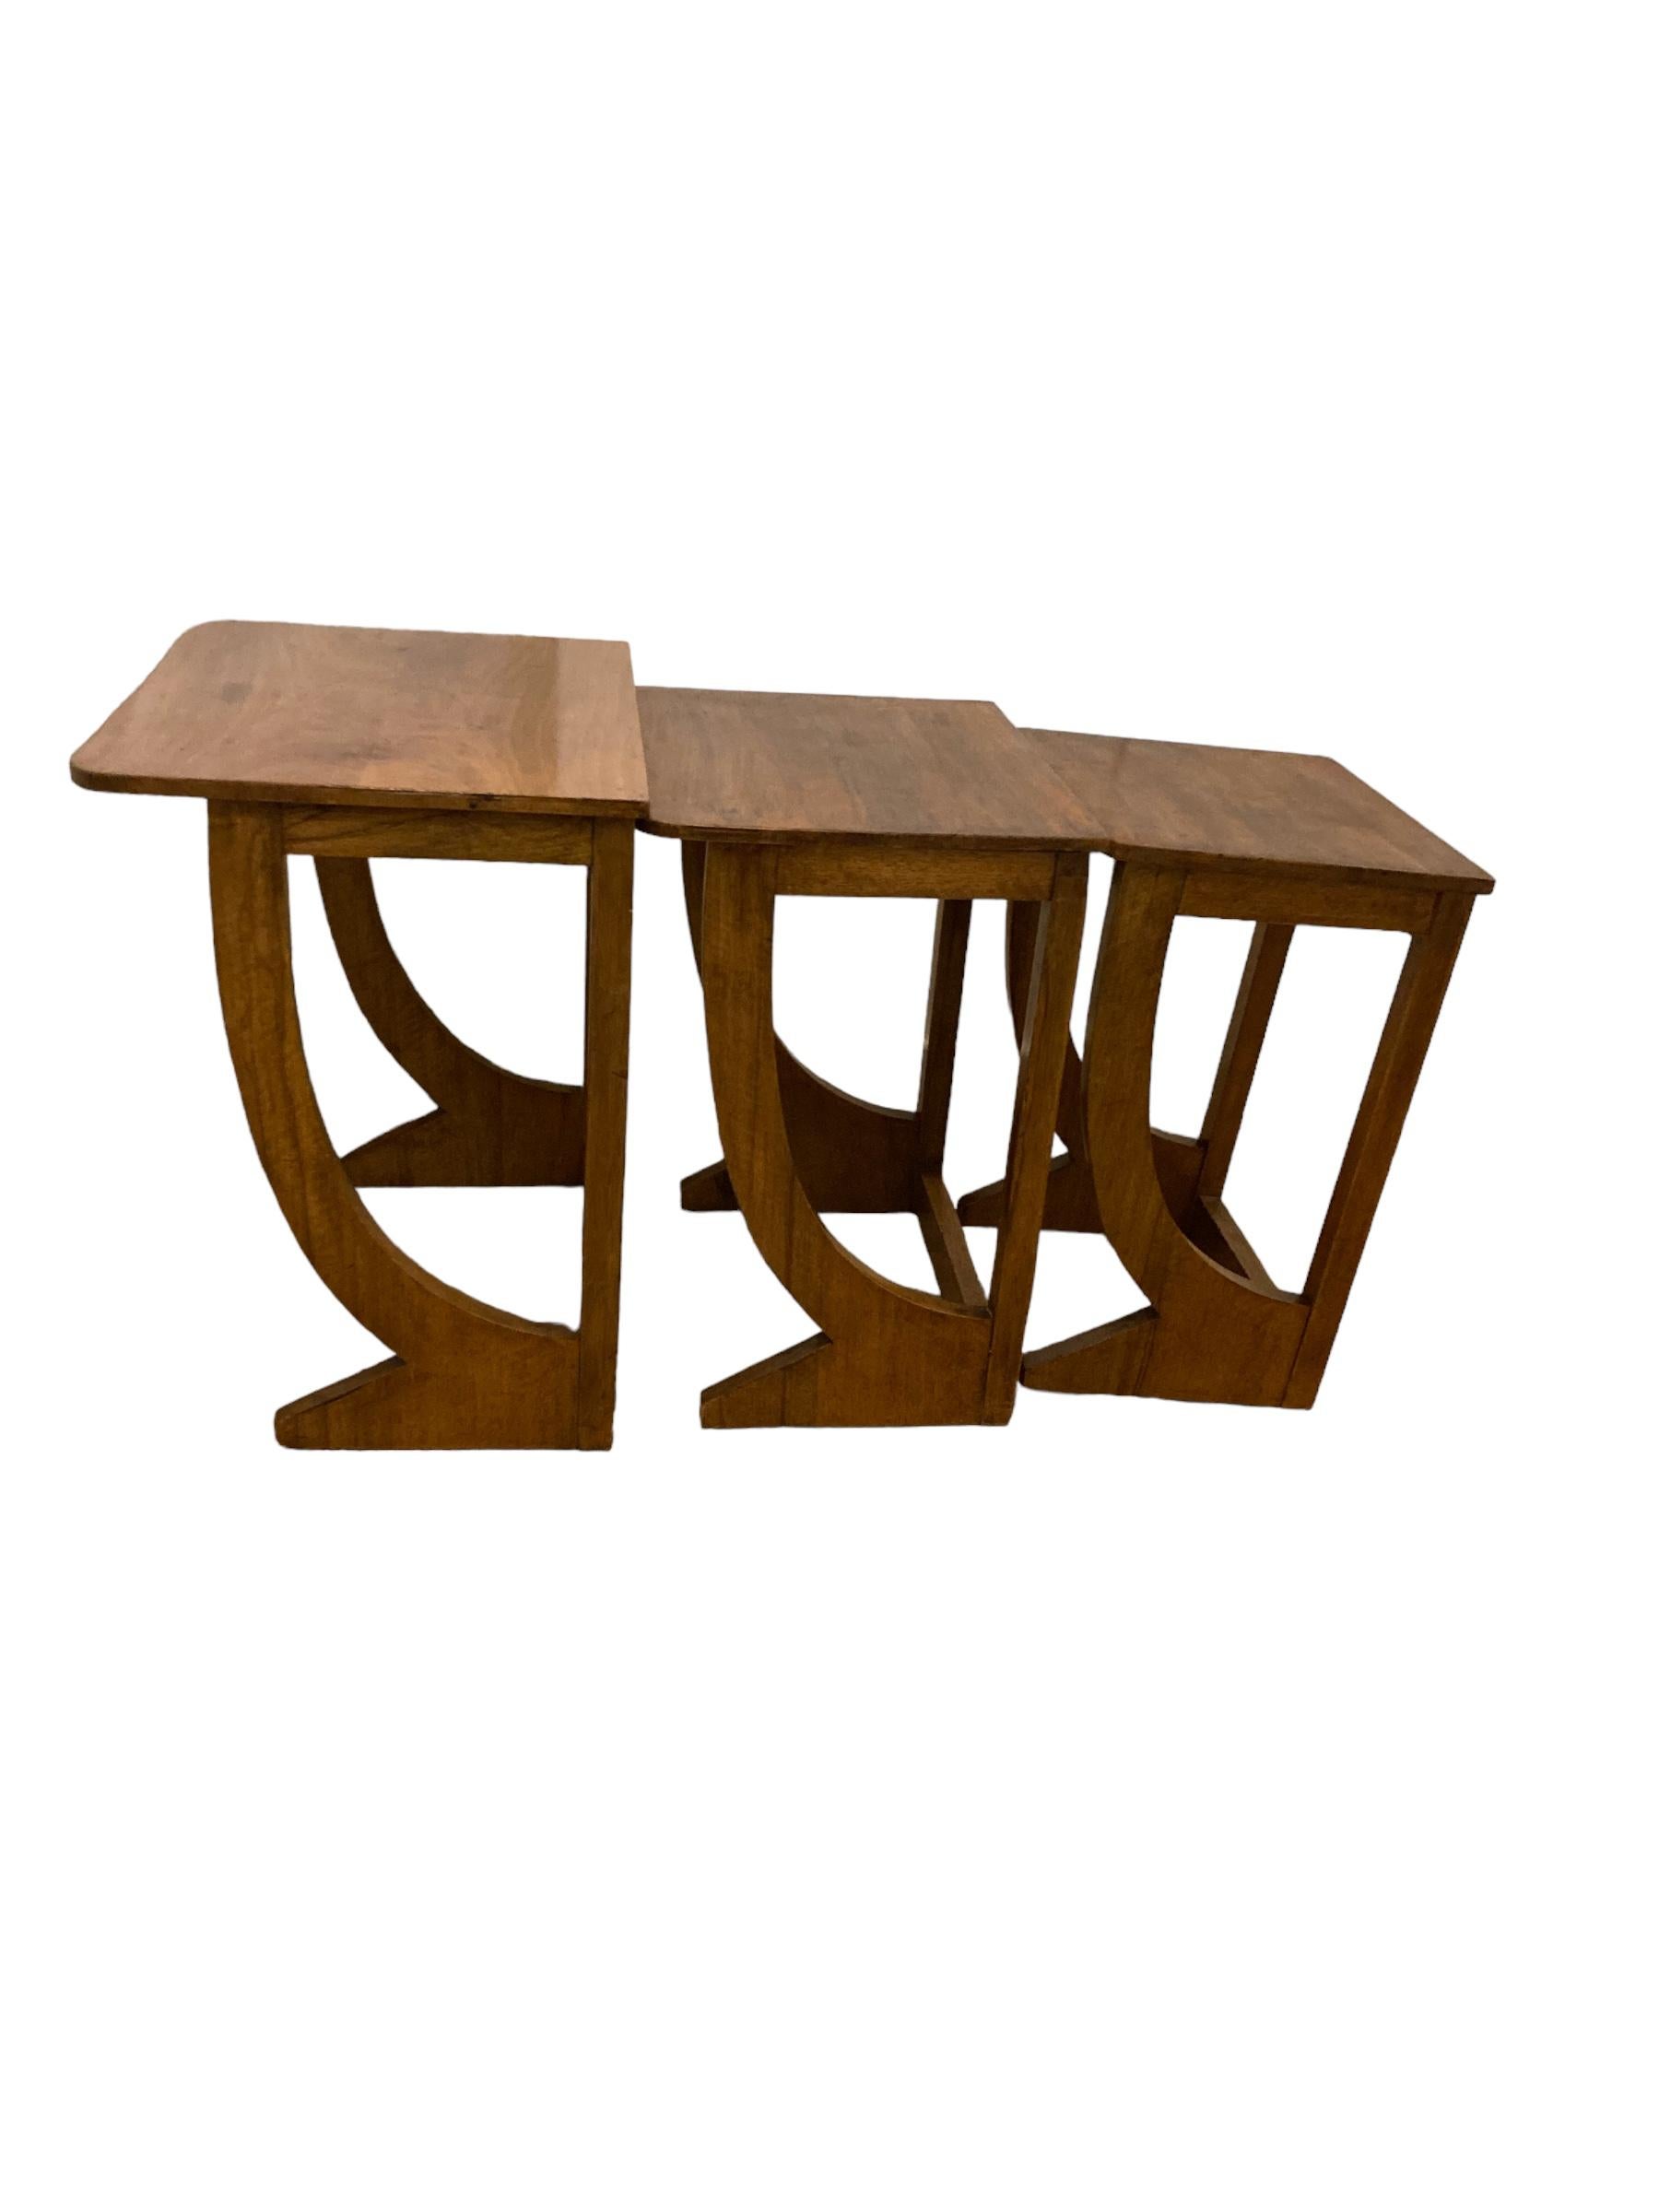 French Art Deco Walnut Nest of Tables For Sale 5